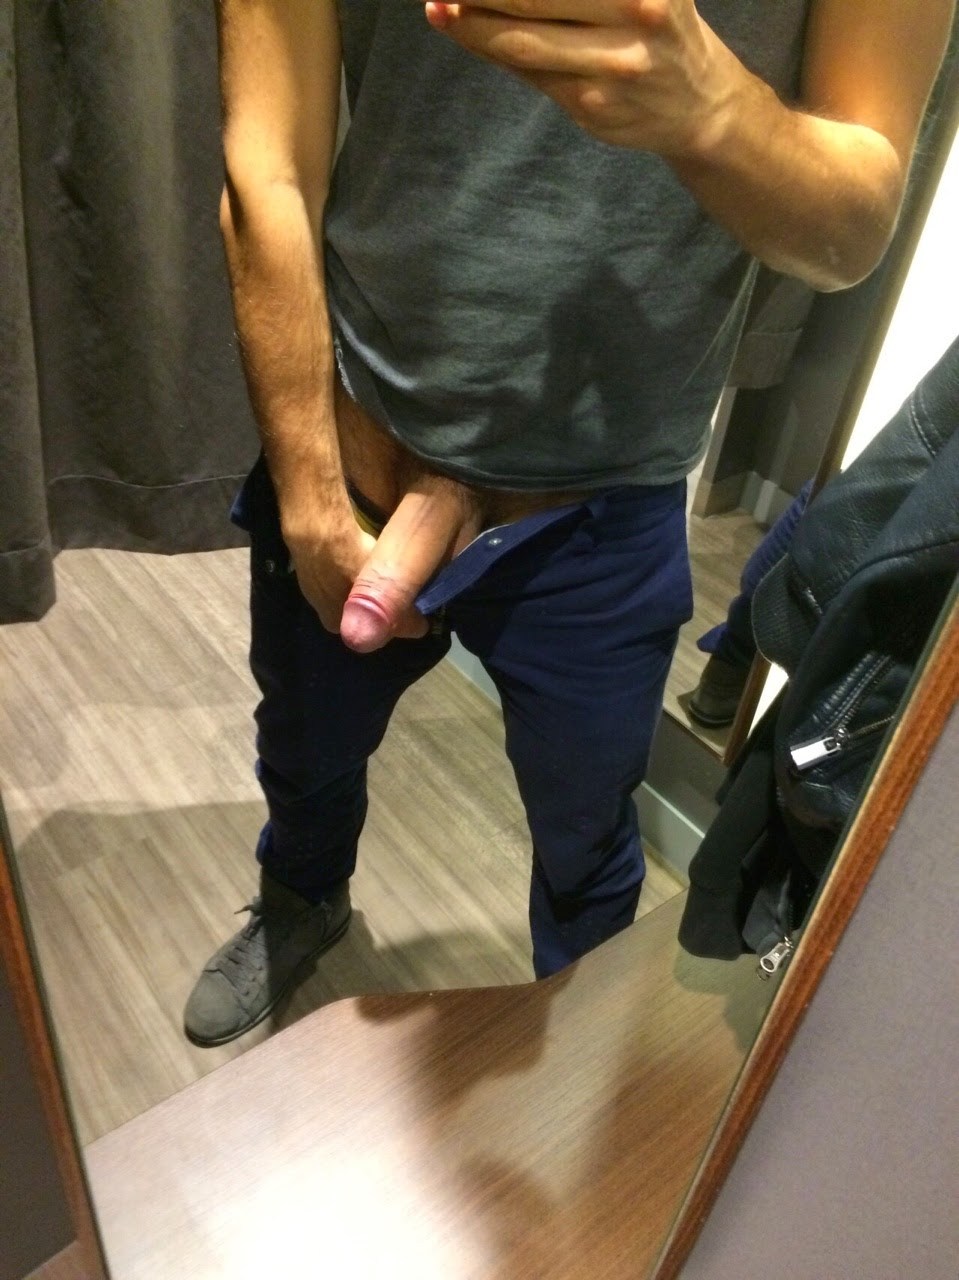 He Flated His Dick in the Dressing Room (73 photos)